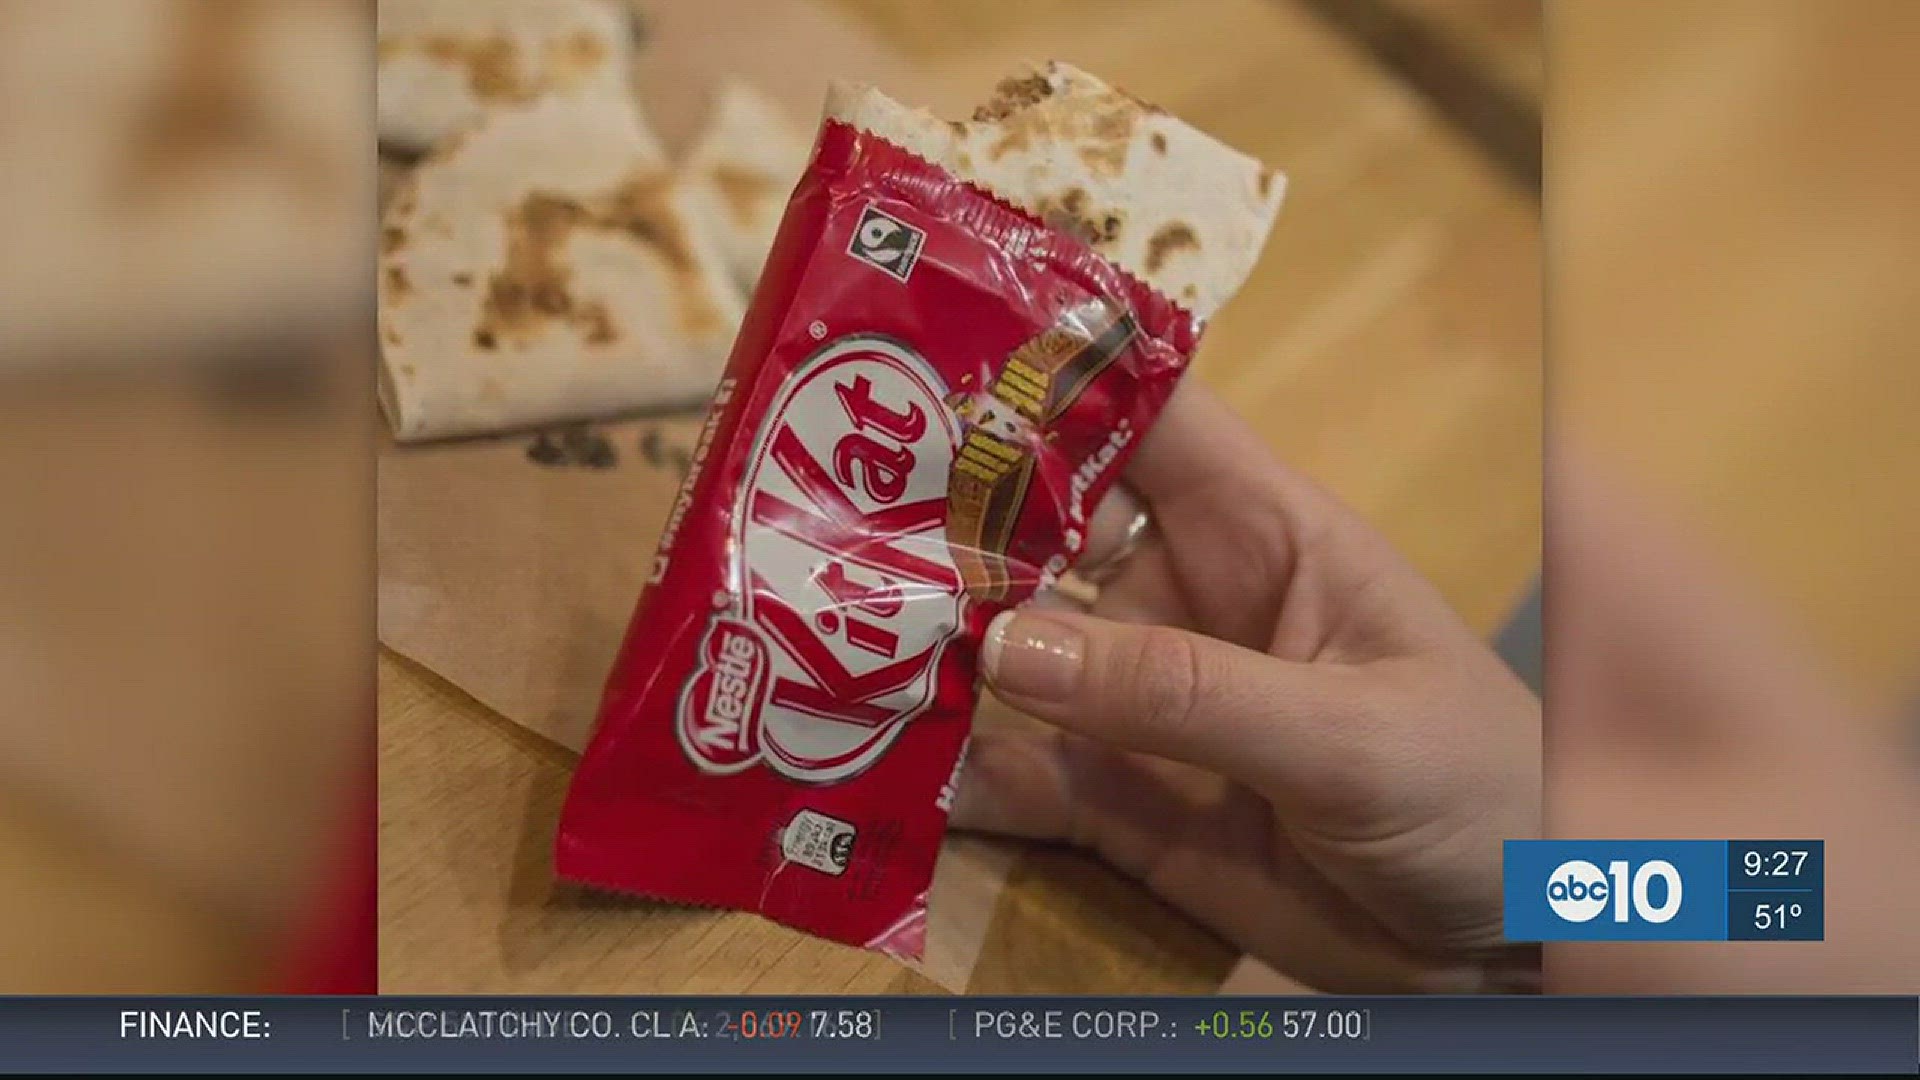 Taco Bell is preparing to launch the Kit Kat Quesadillas in the United States.